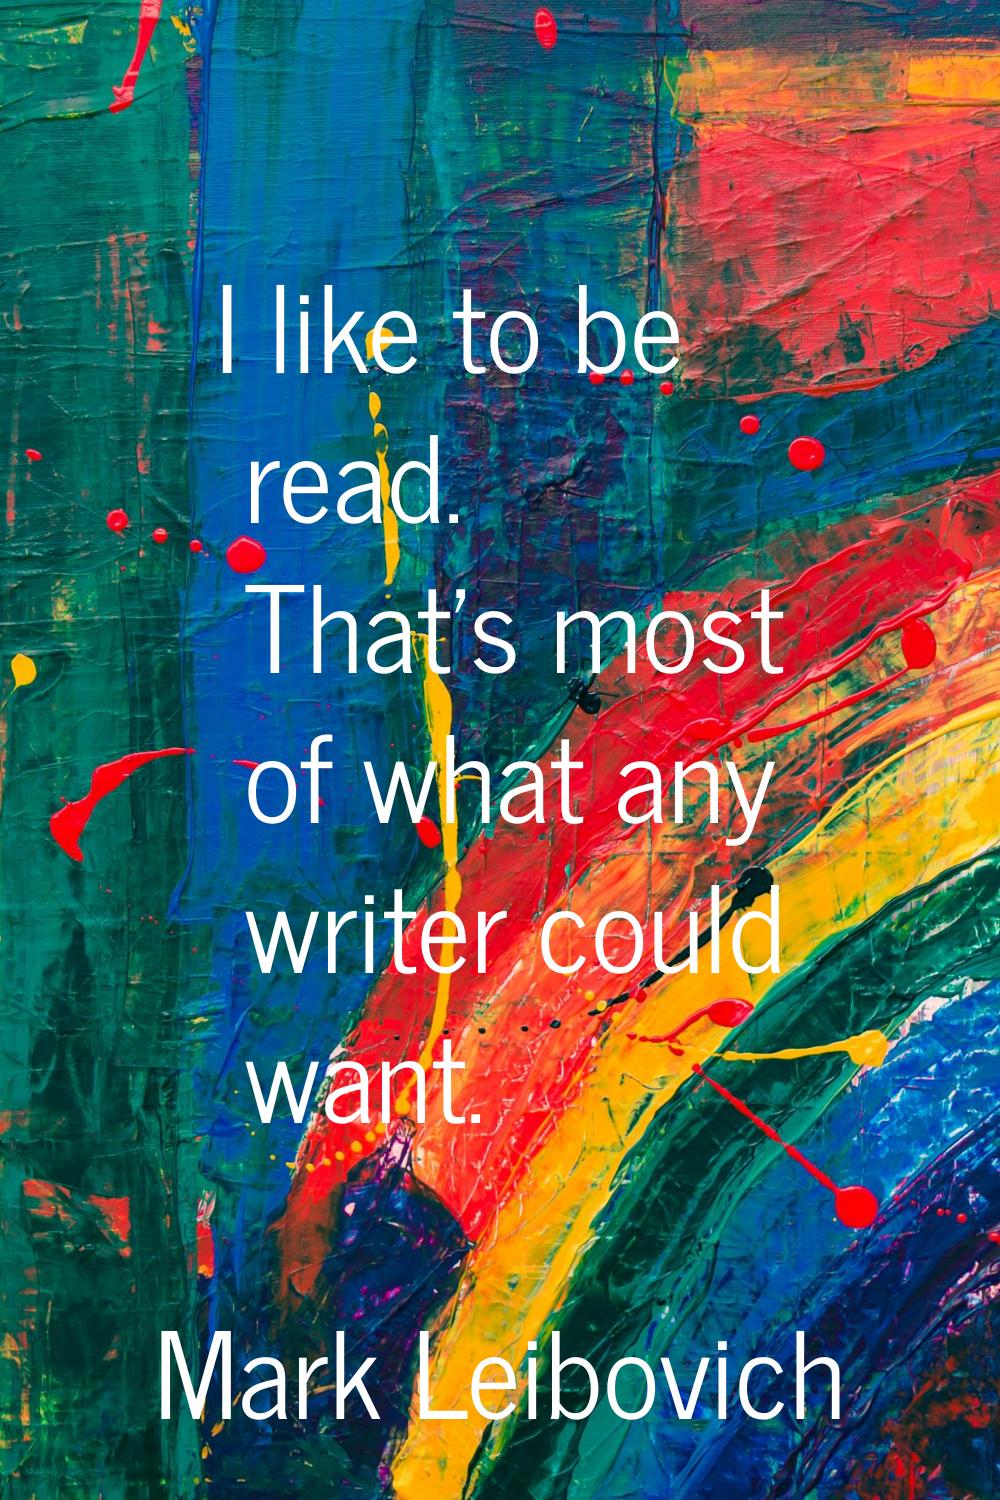 I like to be read. That's most of what any writer could want.